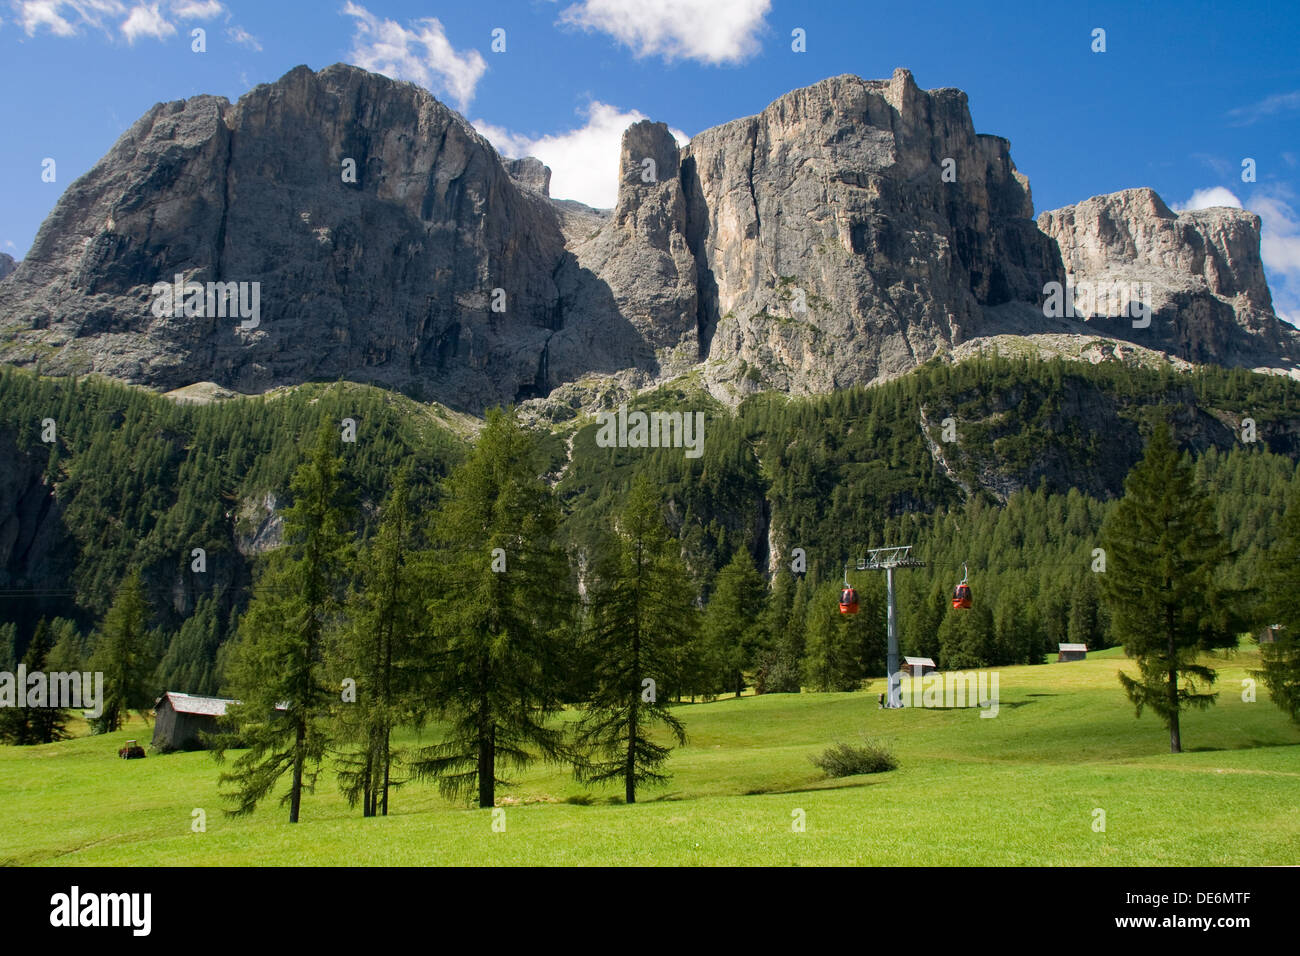 The Sella Group, a plateau shaped massif in the Dolomites, Italy. Stock Photo